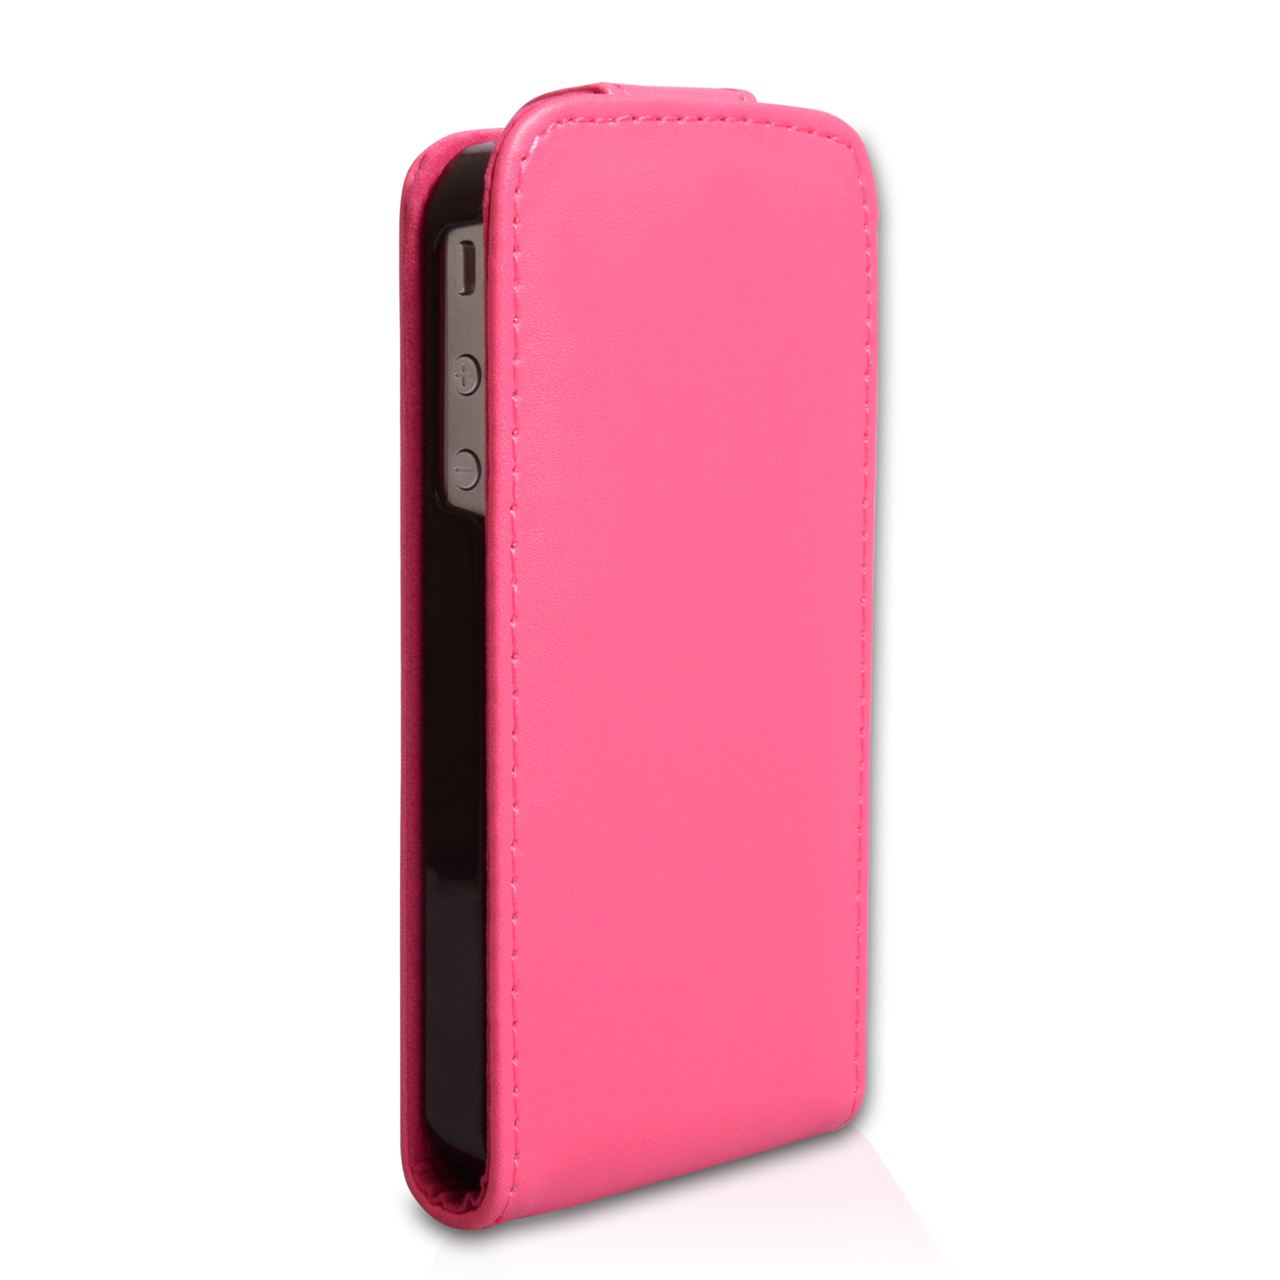 YouSave Accessories iPhone 4 / 4S Leather Effect Flip Case - Hot Pink